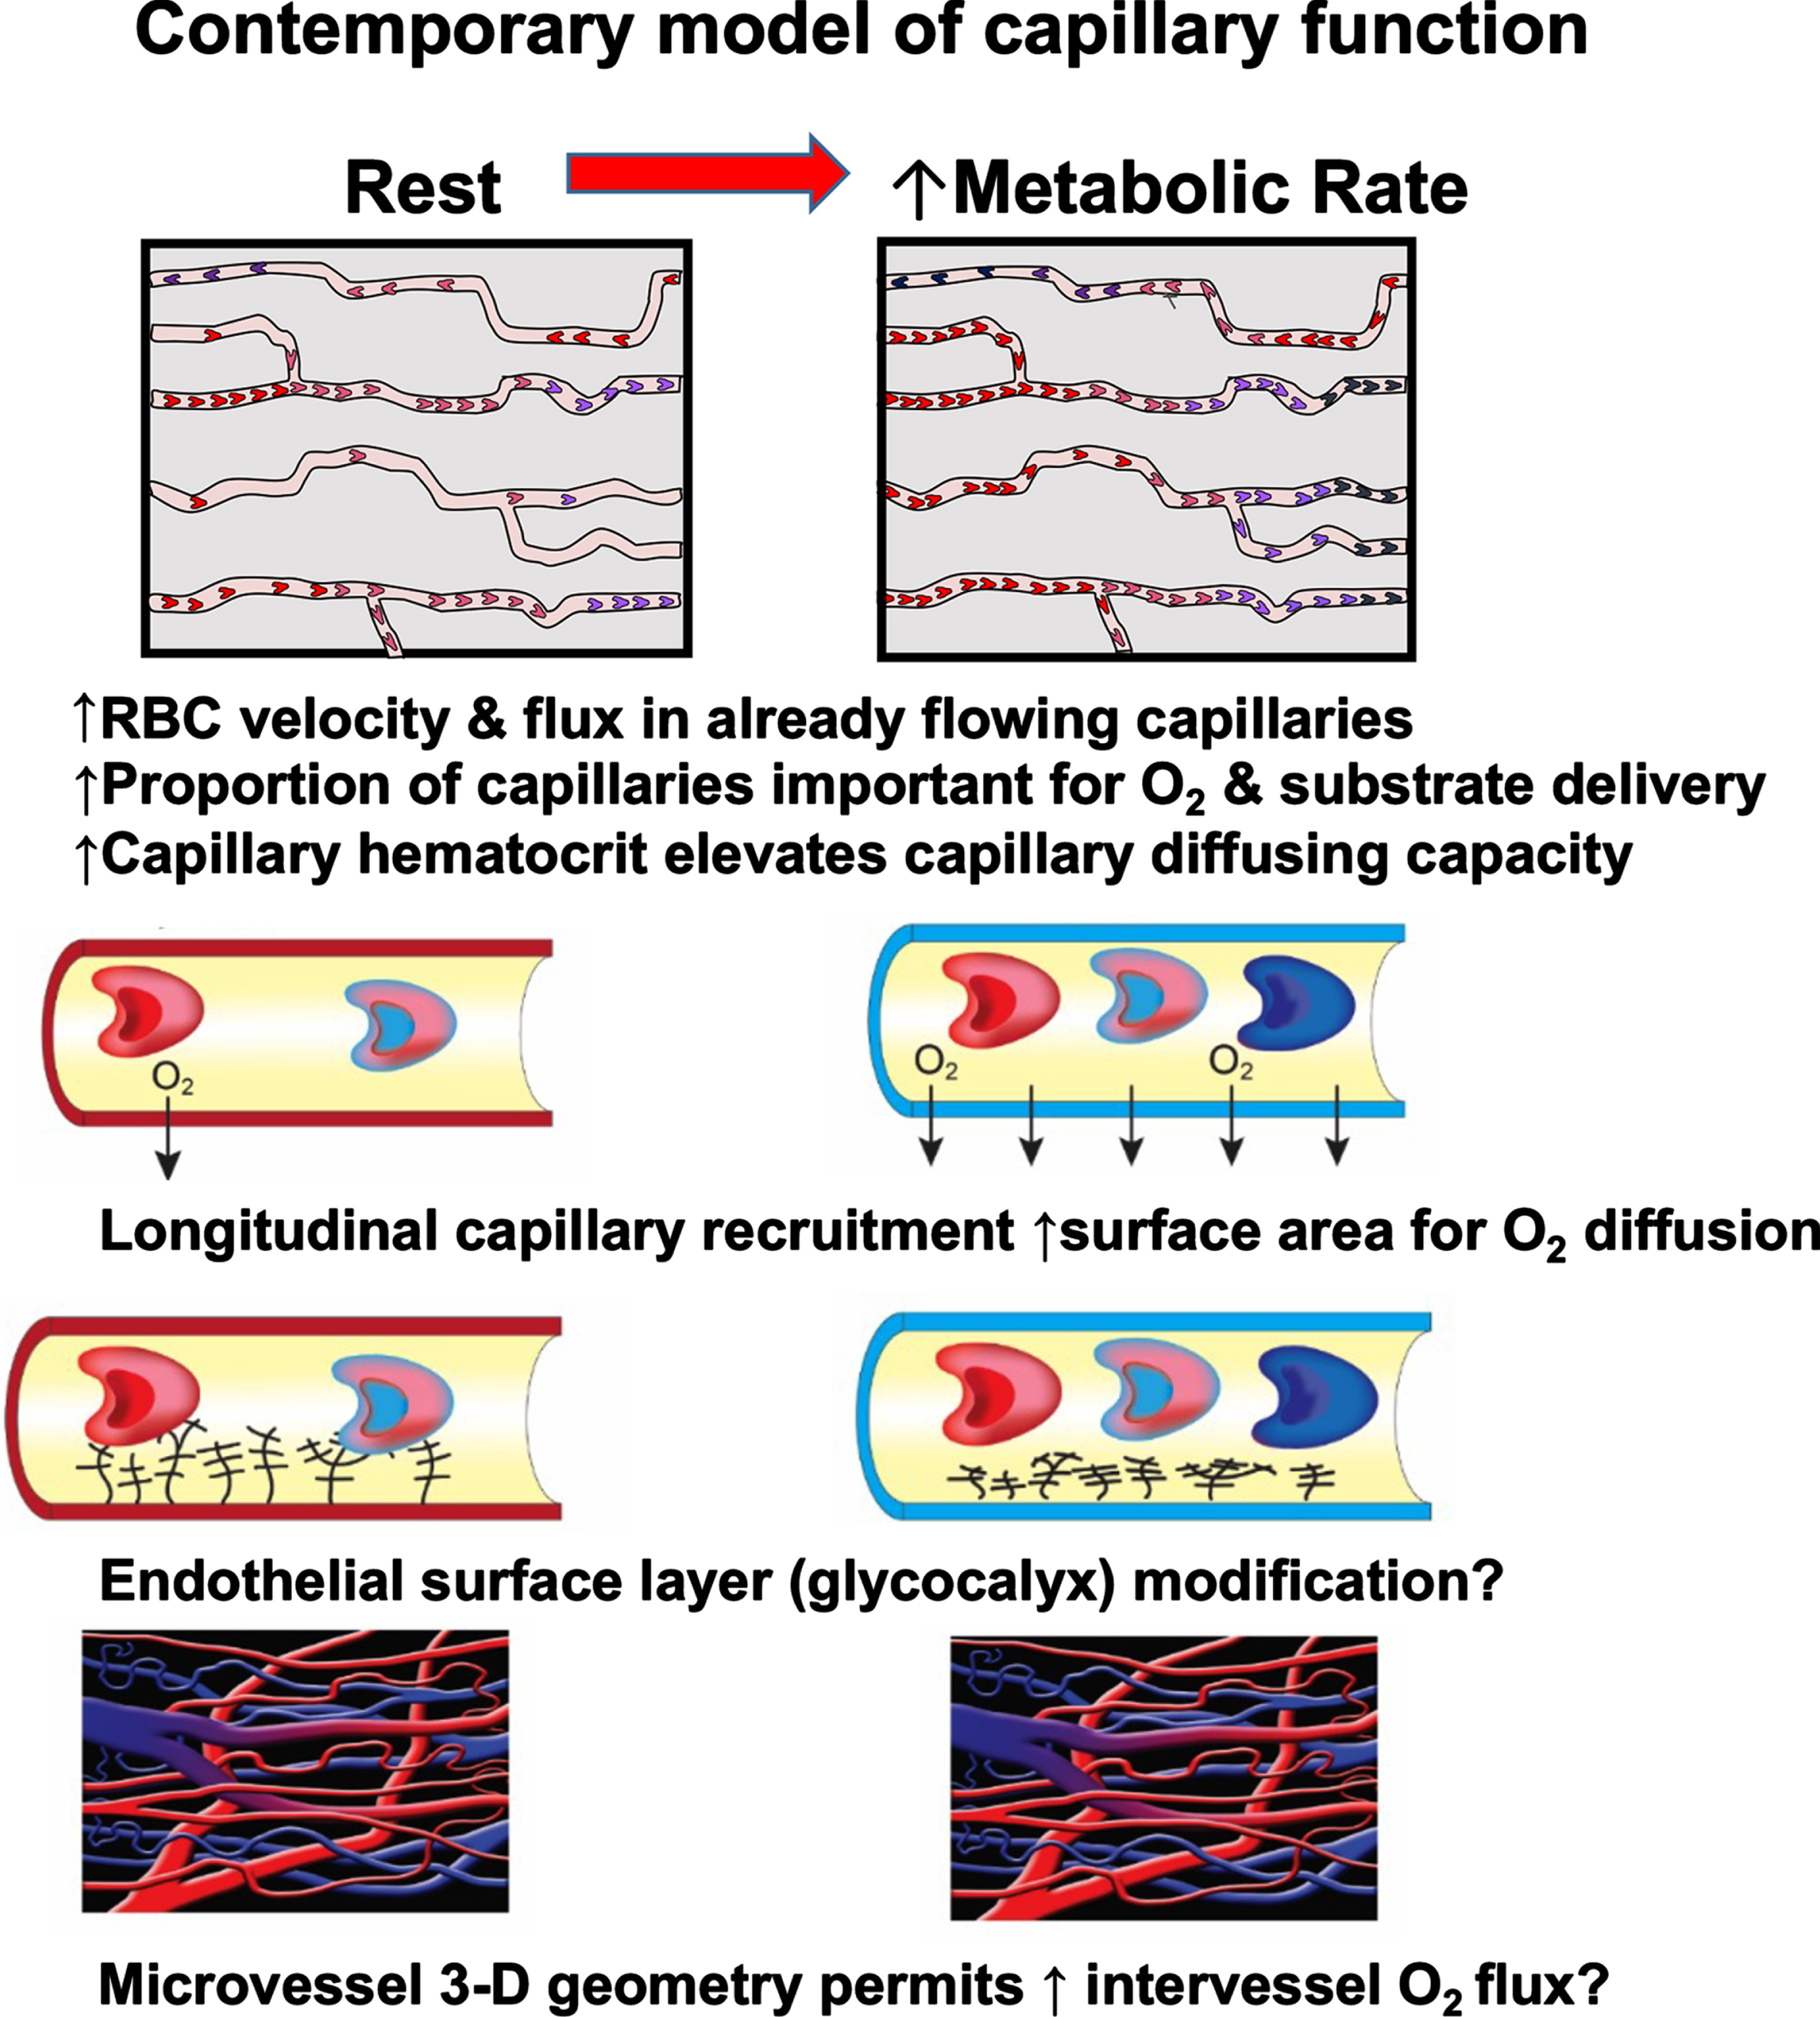 Contemporary model of brain capillary function developed in skeletal muscle [54] that demonstrates key features of the capillary bed crucial for blood-tissue O2 (and other substrates) exchange. It is anticipated that further development of these more accurate capillary function models will provide invaluable insights into dysfunction in diseases such as Alzheimer’s and dementia.